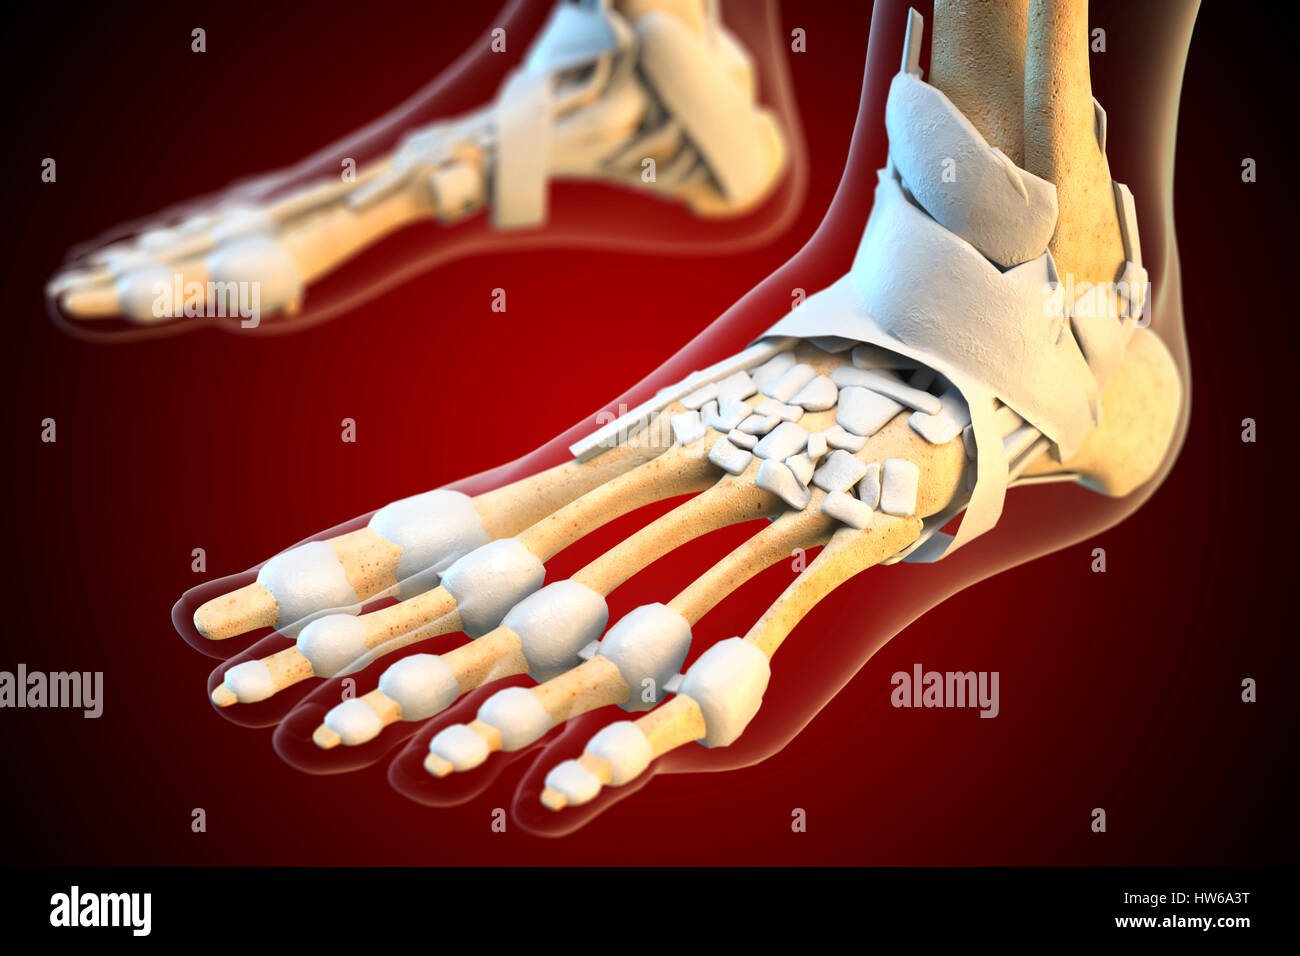 Ligaments of the human foot, illustration. Stock Photo